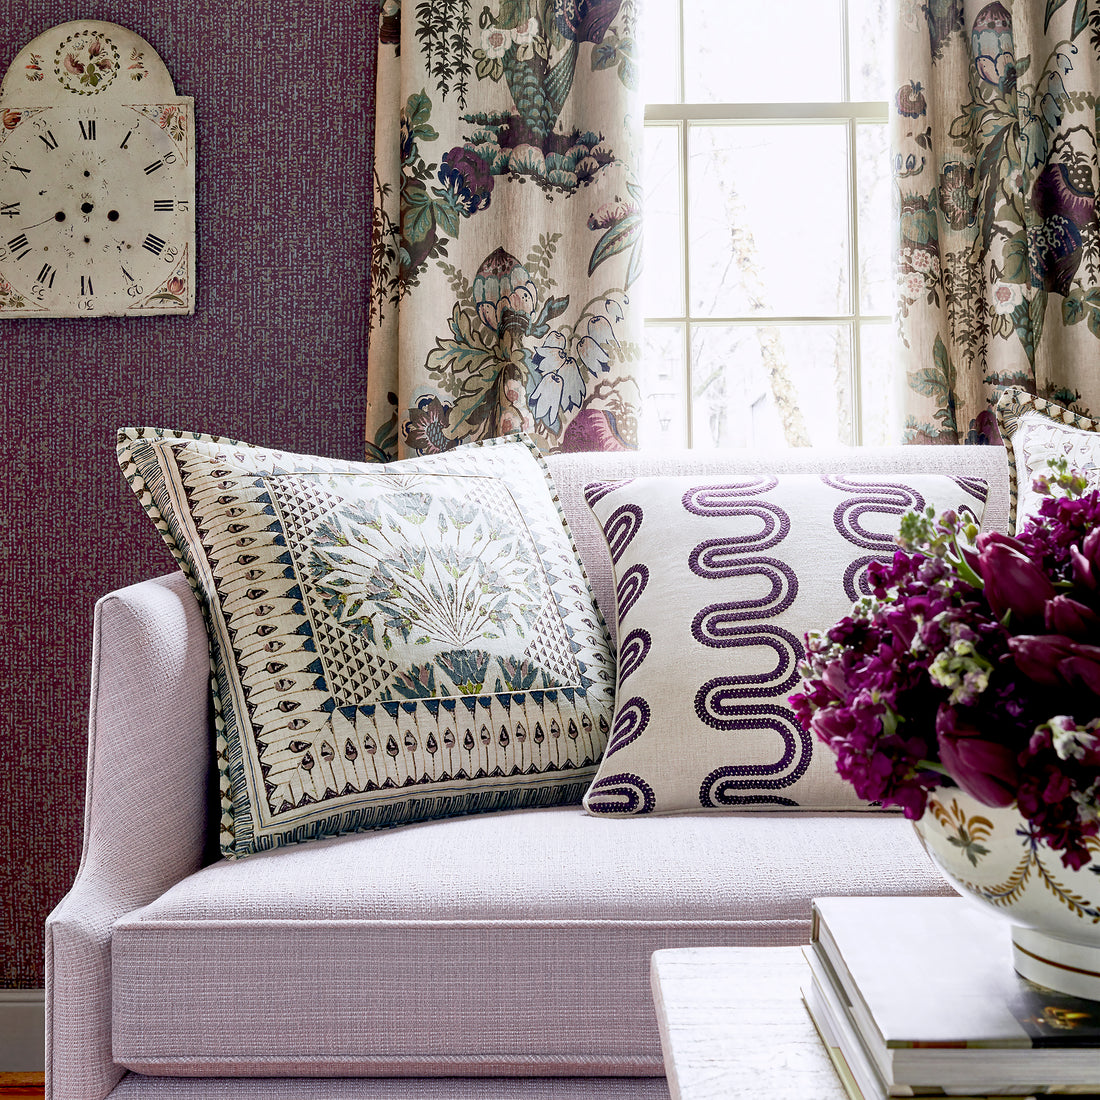 Drapery in Fairbanks printed fabric in Plum - pattern number AF9641 - by Anna French